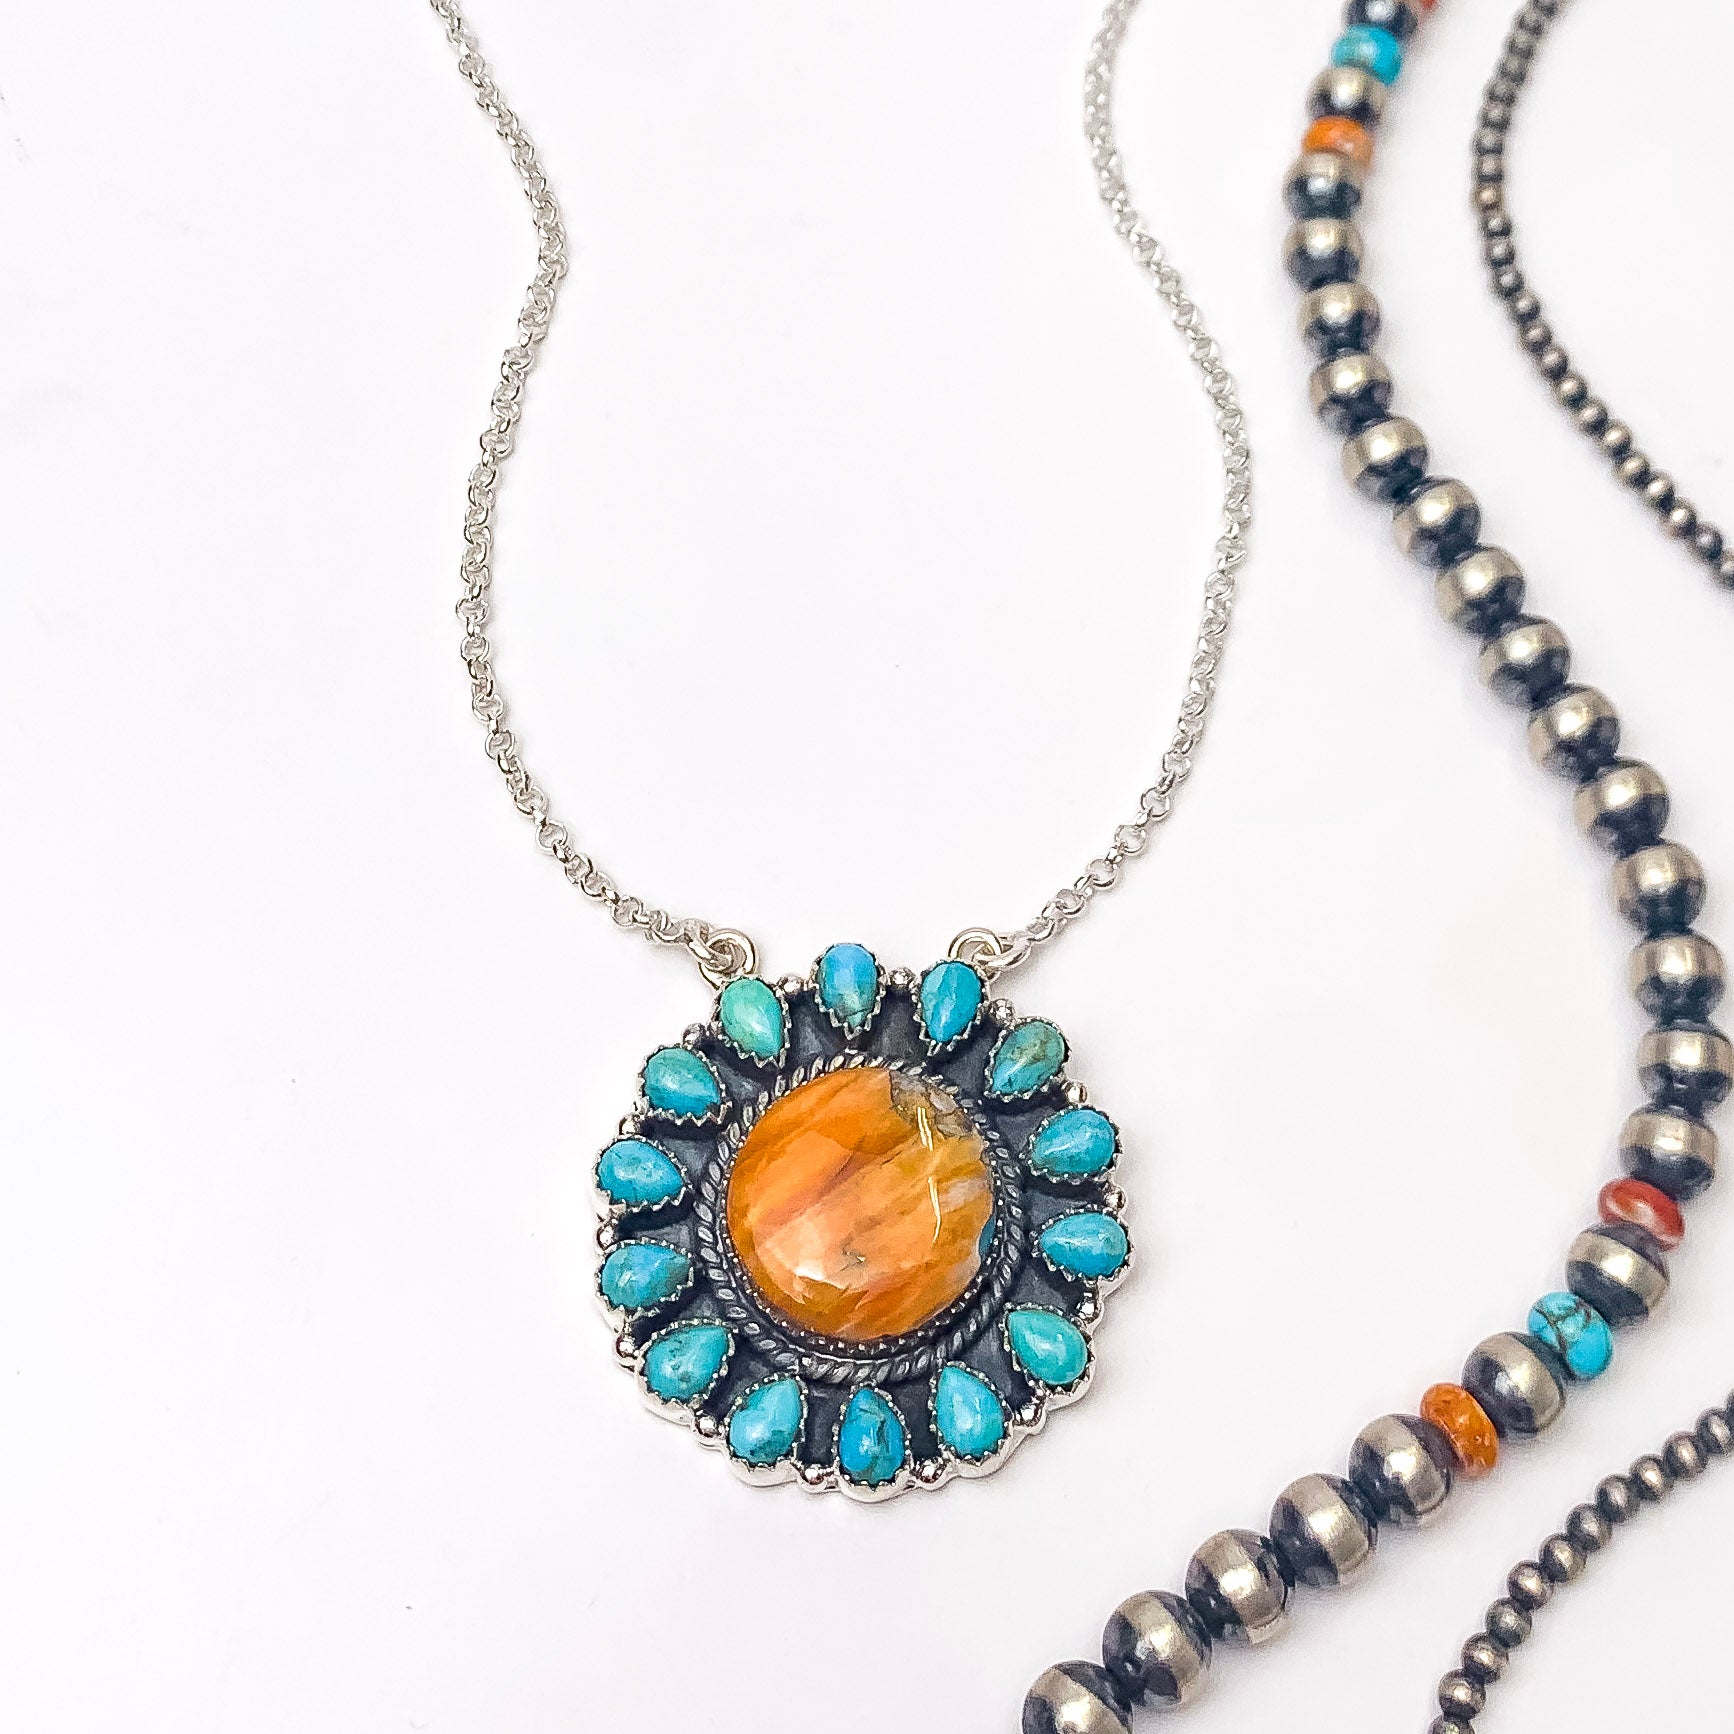 Hada Collection | Handmade Sterling Silver Necklace with Spiny Oyster Center and Turquoise Outline - Giddy Up Glamour Boutique